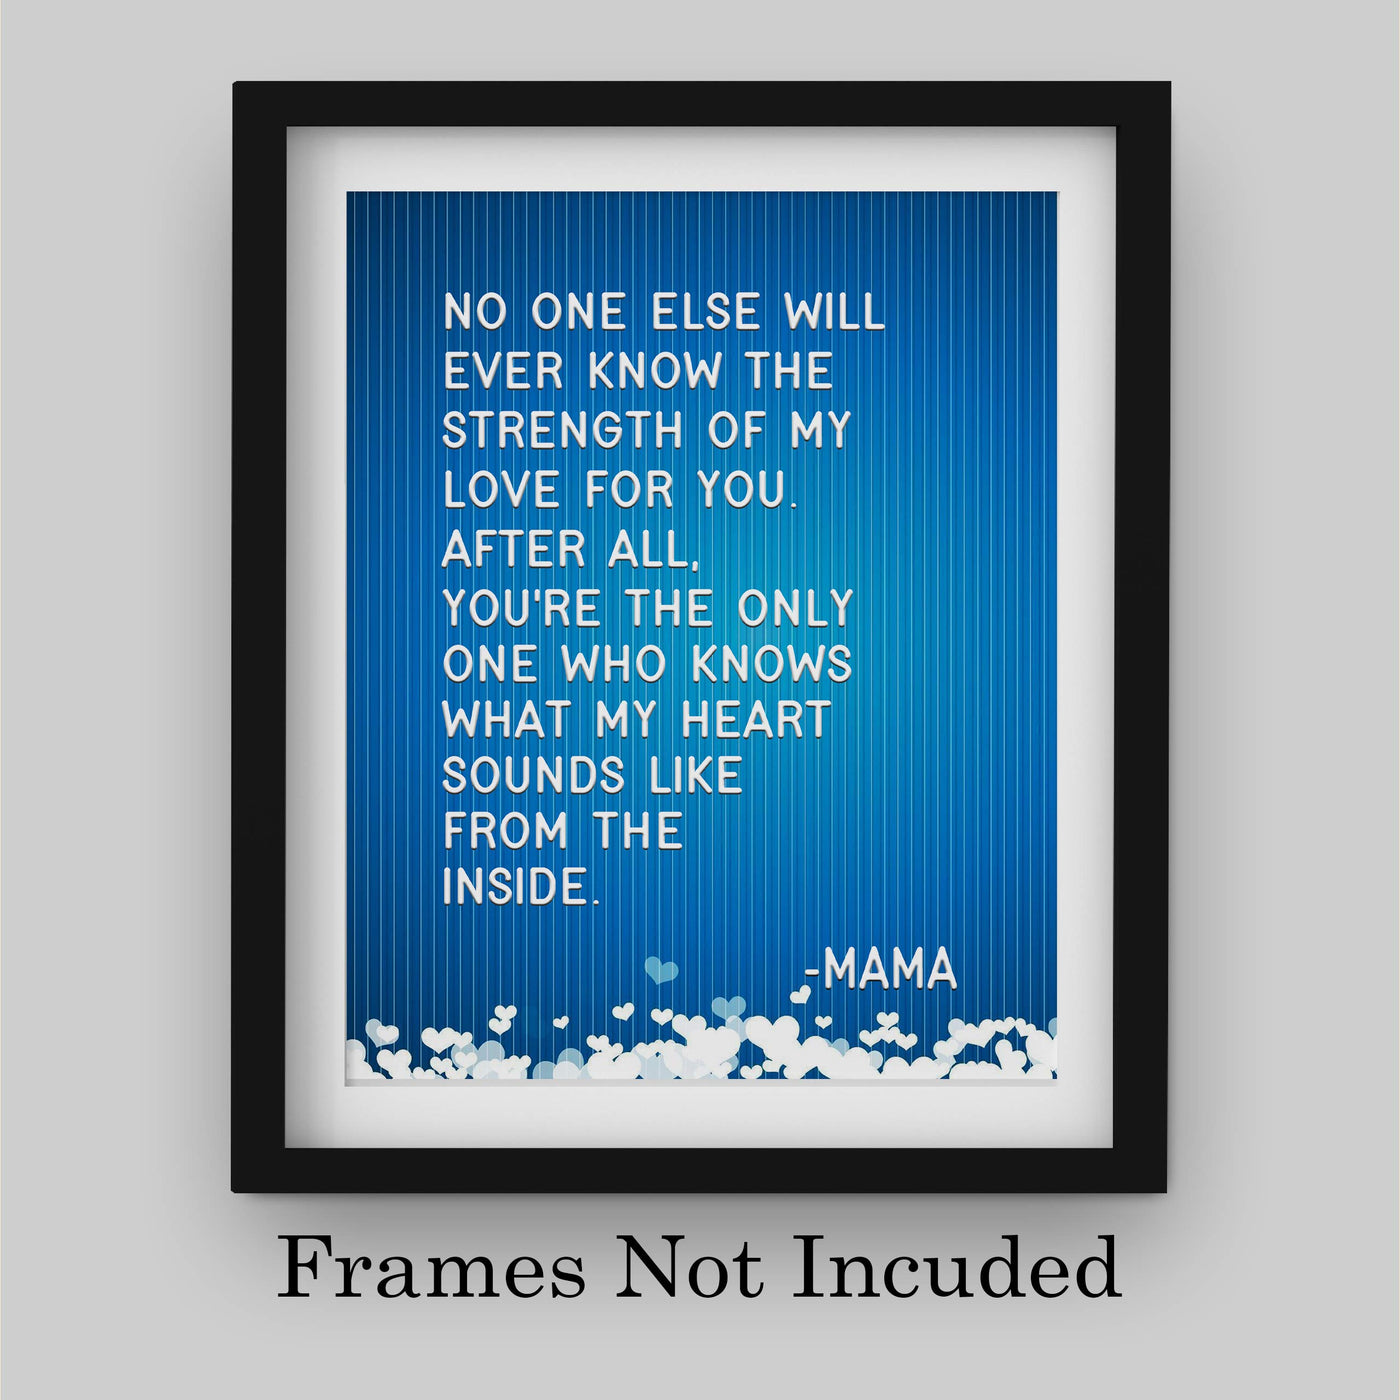 No One Else Will Ever Know My Love For You-Mama Inspirational Wall Art -8x10" Typographic Poster Print-Ready to Frame. Home-Nursery-Office-Clinic Decor. Great for Mothers. Perfect Baby Shower Gift!